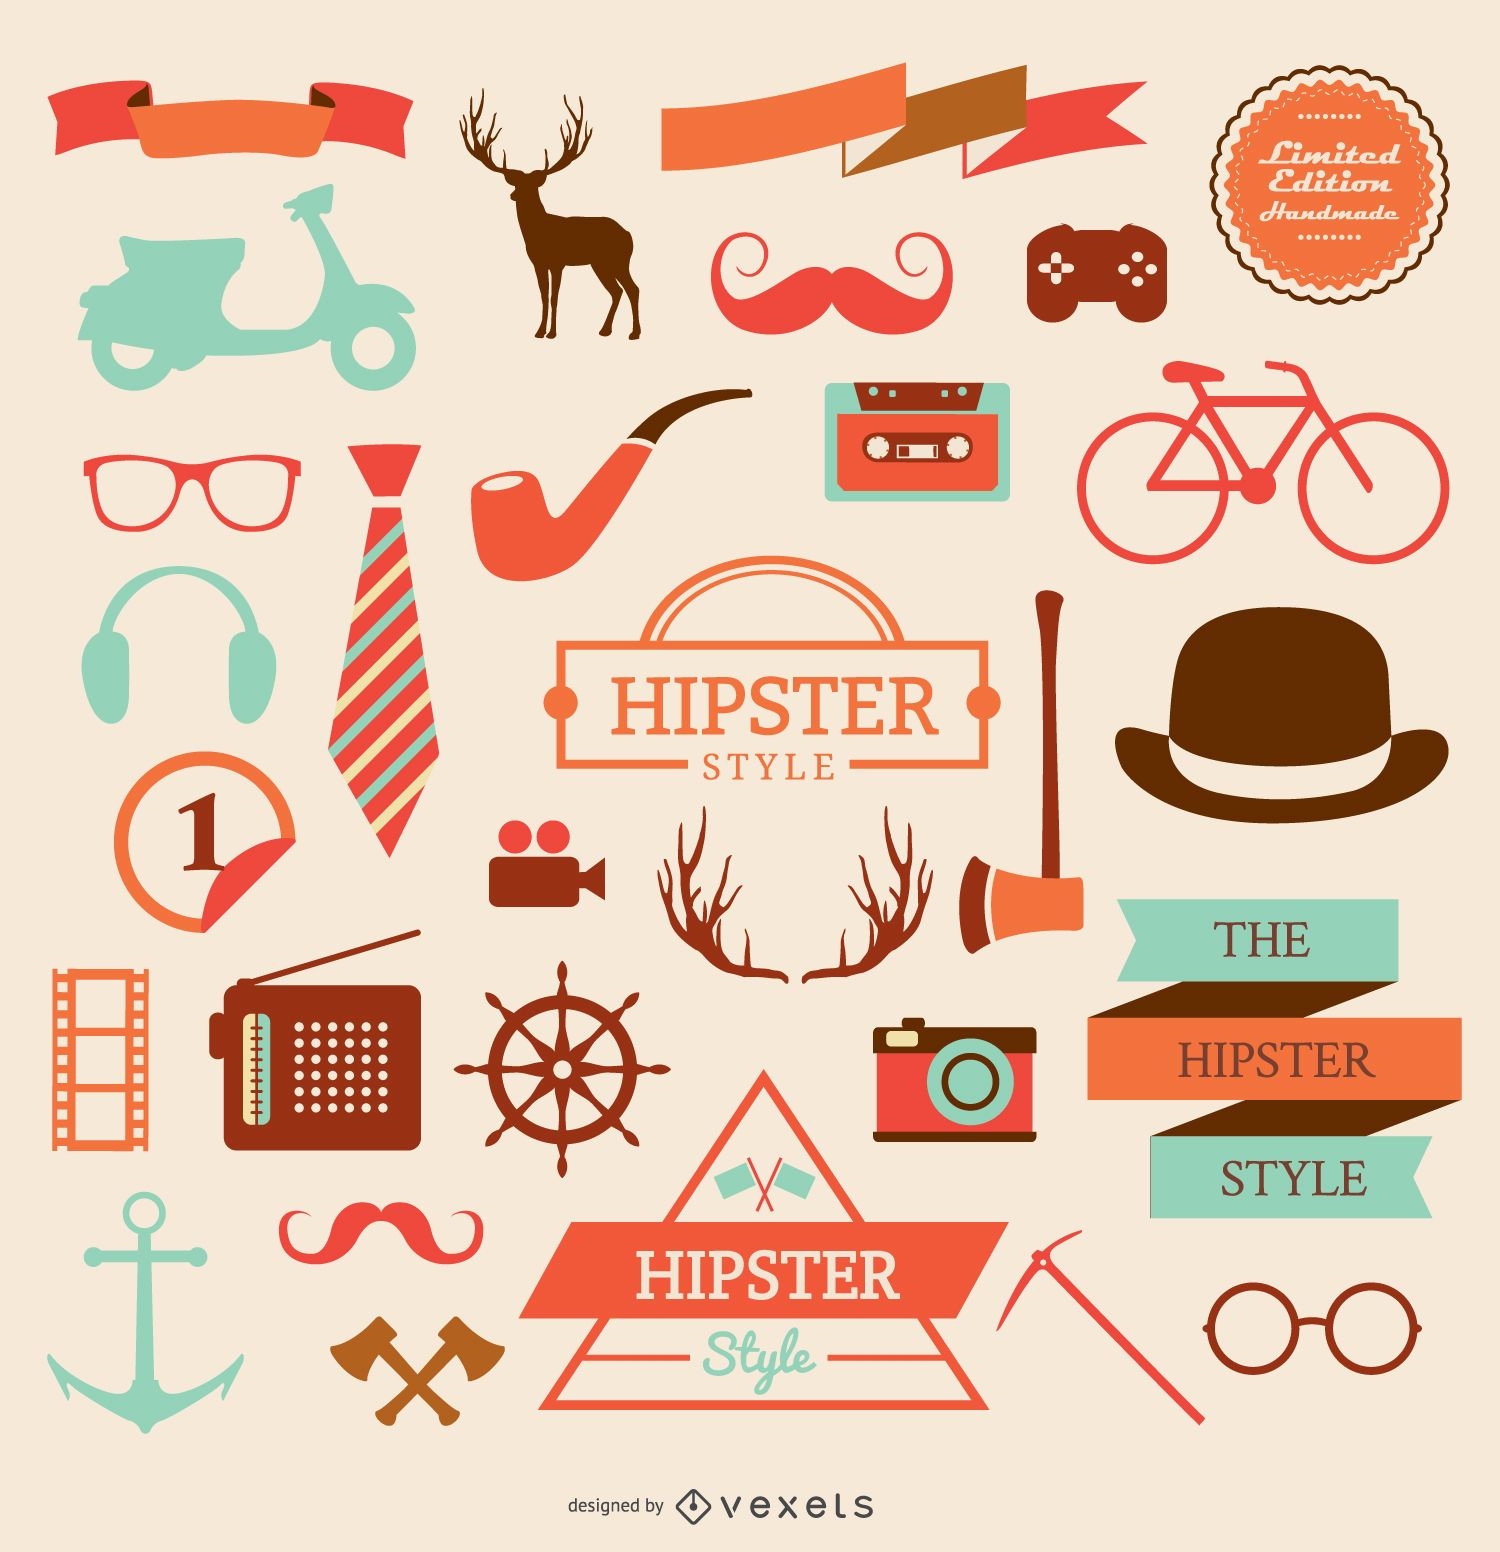 Hipster element icon set 